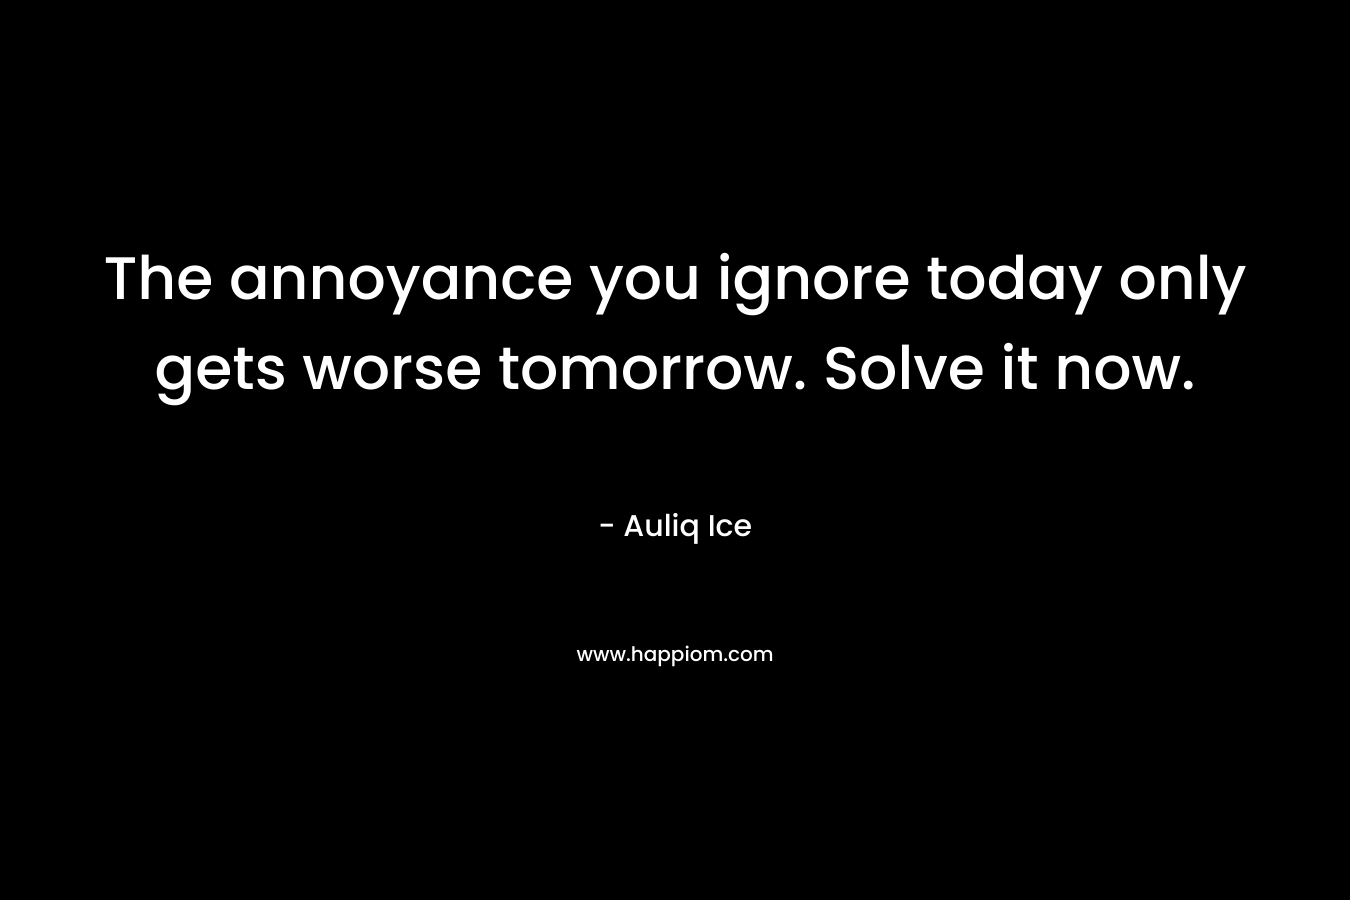 The annoyance you ignore today only gets worse tomorrow. Solve it now. – Auliq Ice